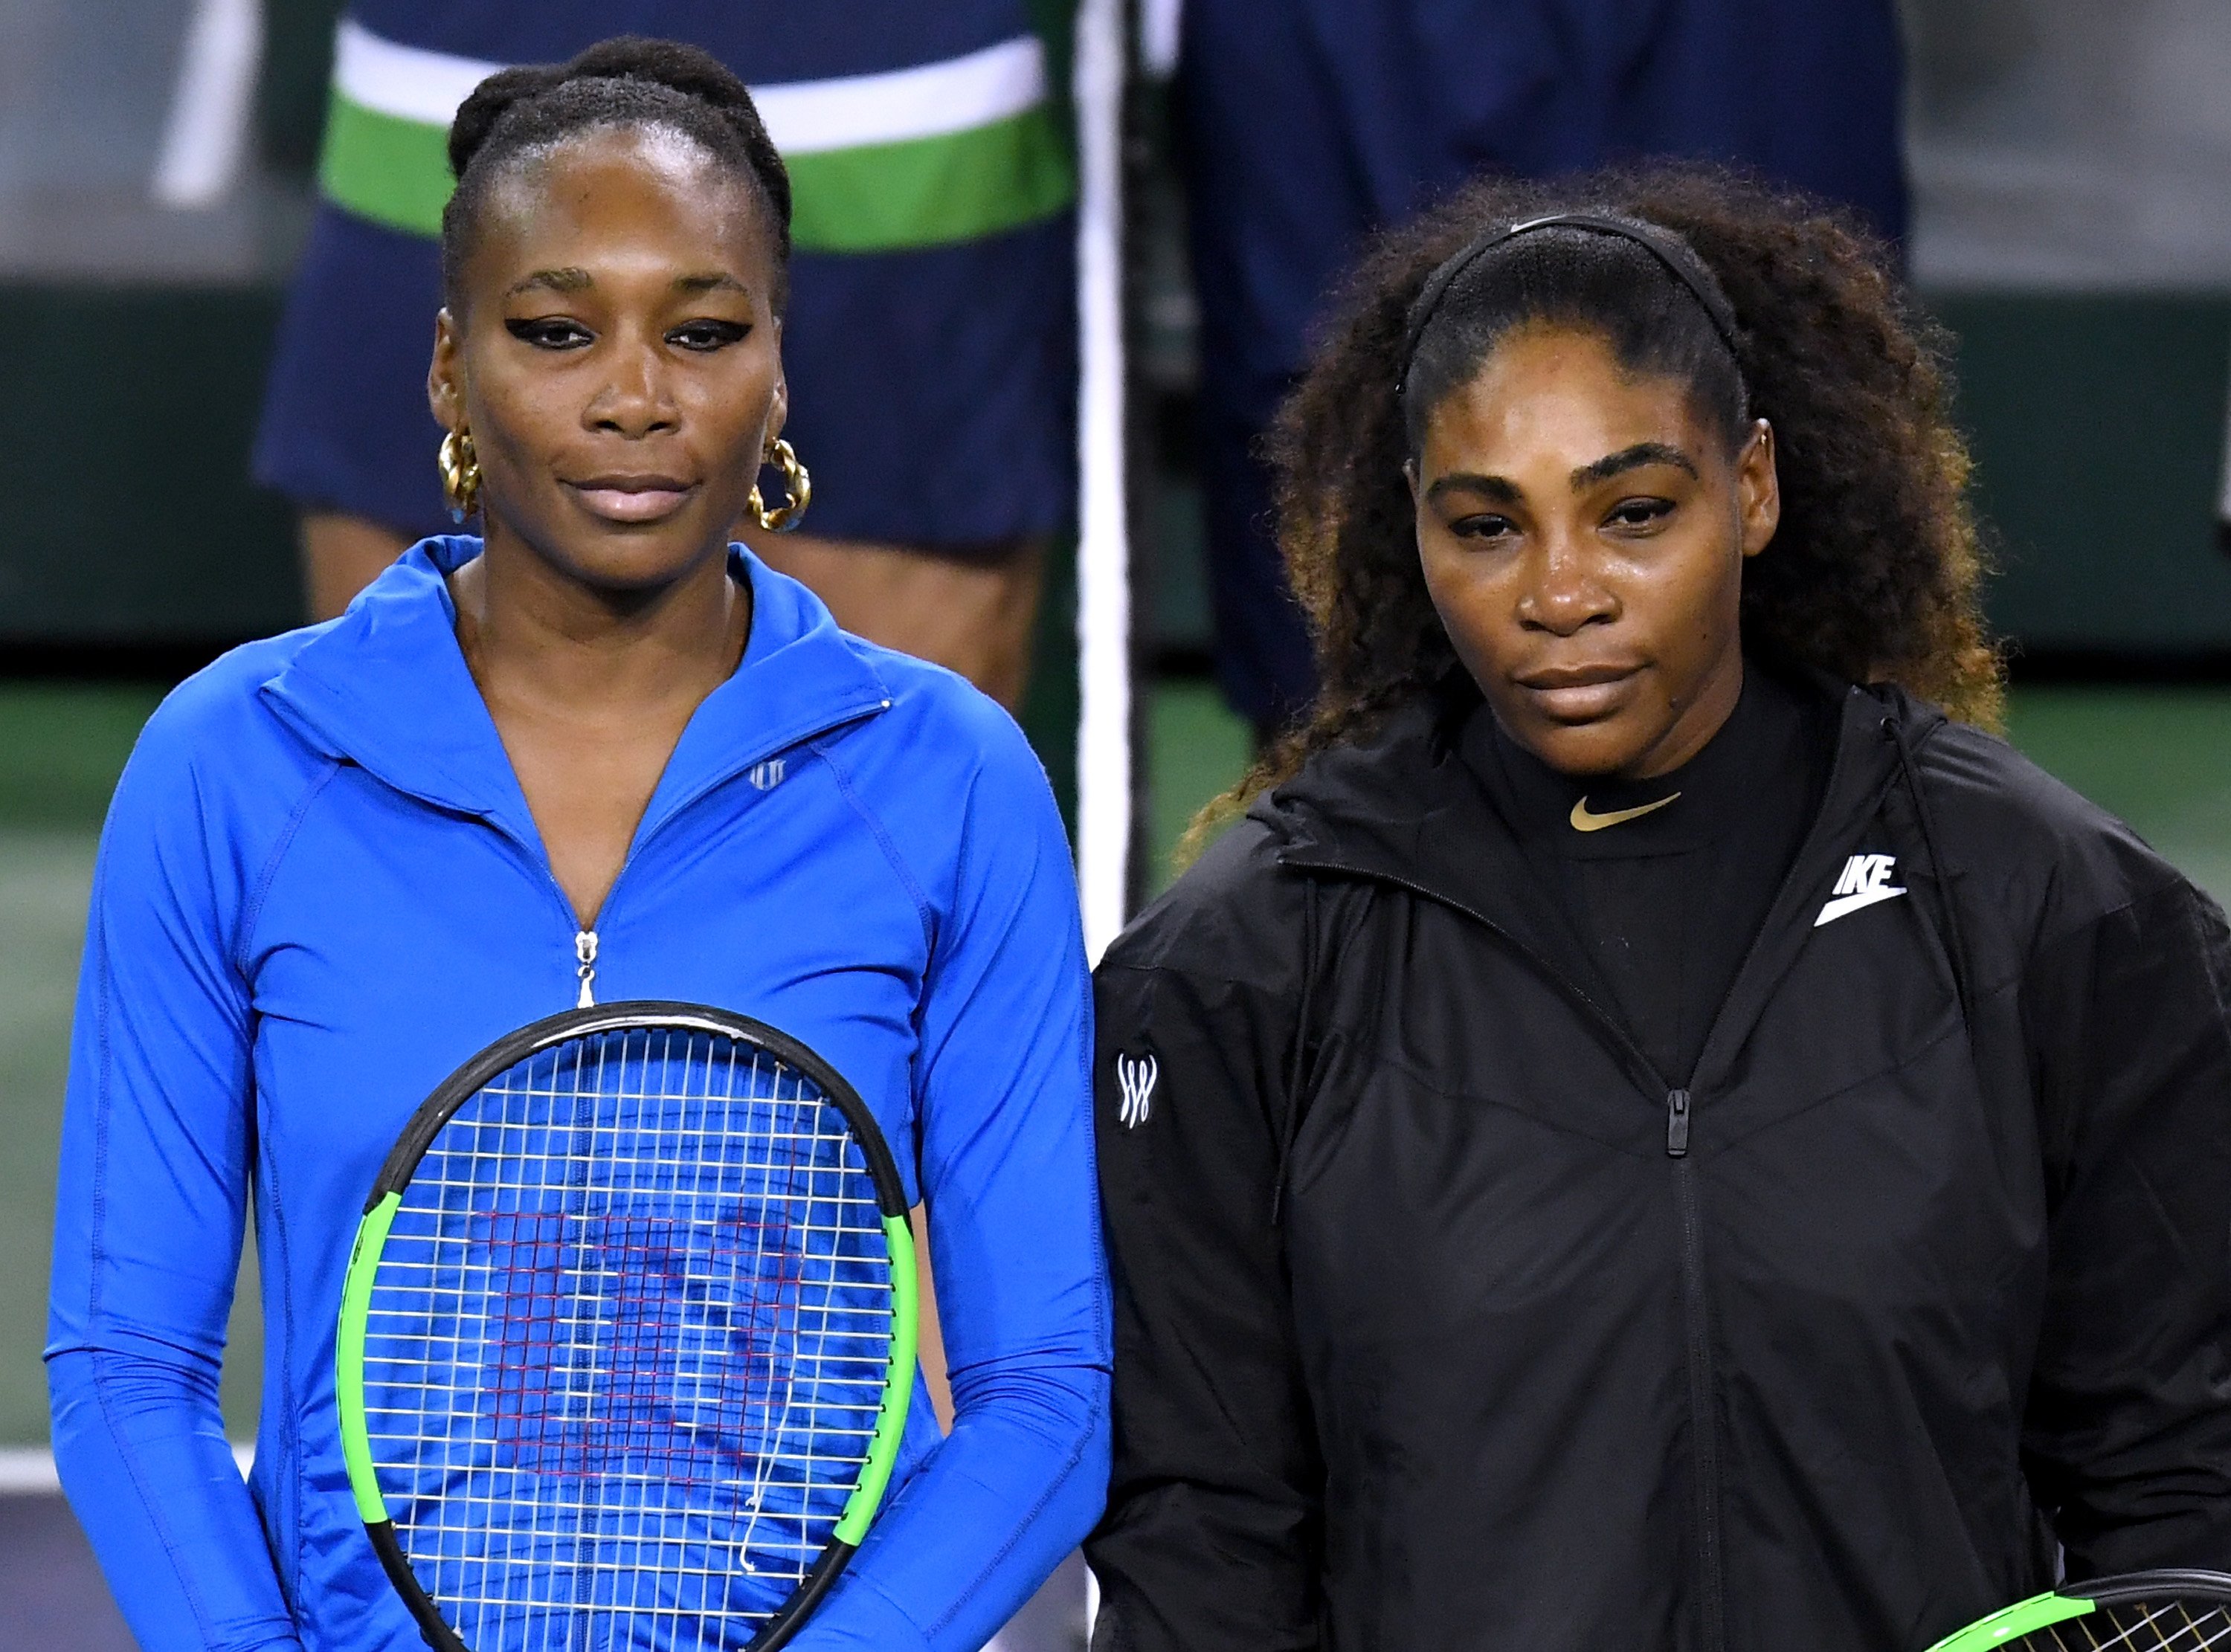 Venus Williams and Serena Williams during the BNP Paribas Open in Indian Wells, California, 2018 | Source: Getty Images